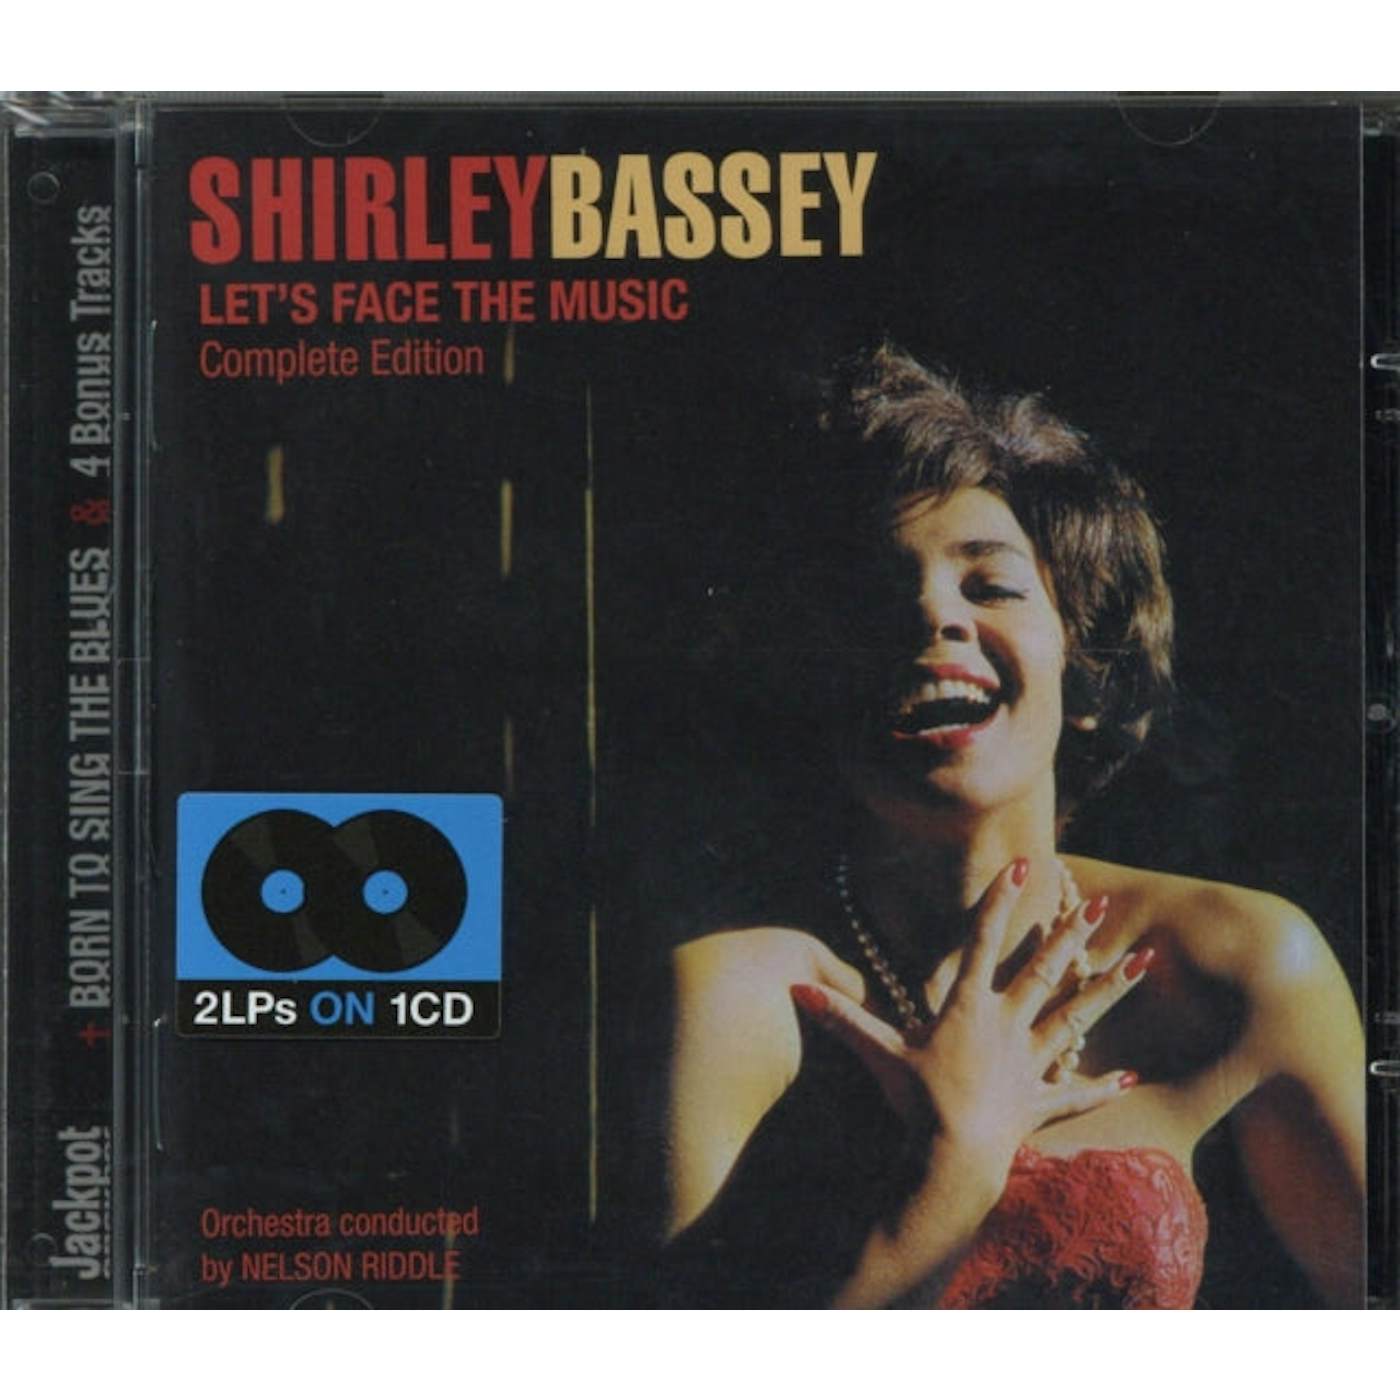 Shirley Bassey CD - Let's Face The Music / Born To Sing The Blues